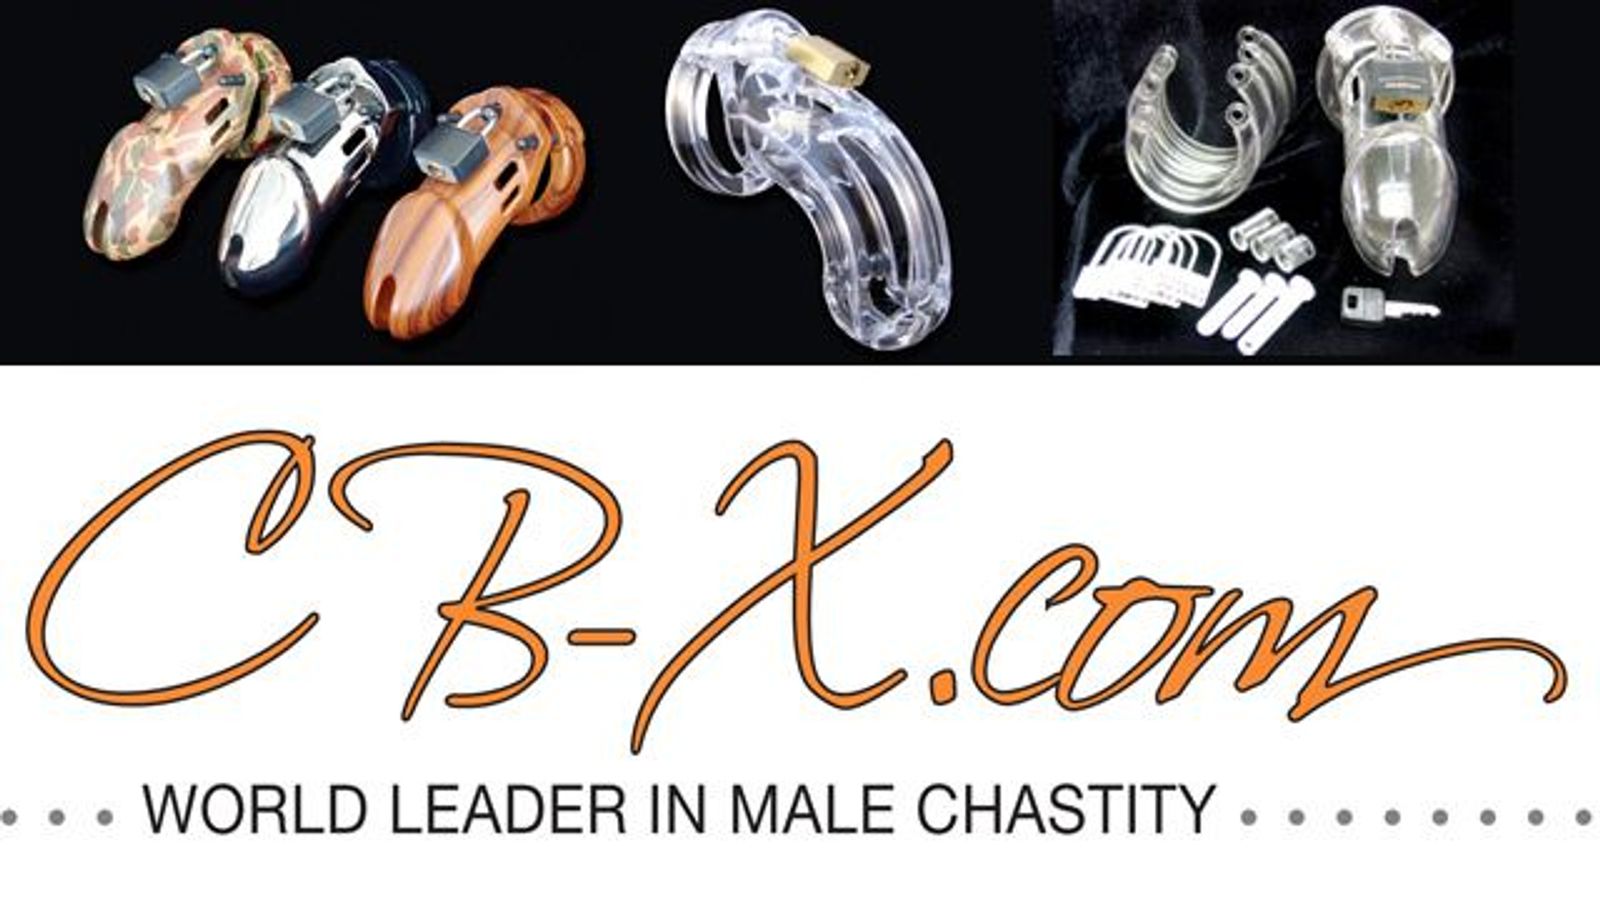 CB-X Male Chastity Announces New Releases